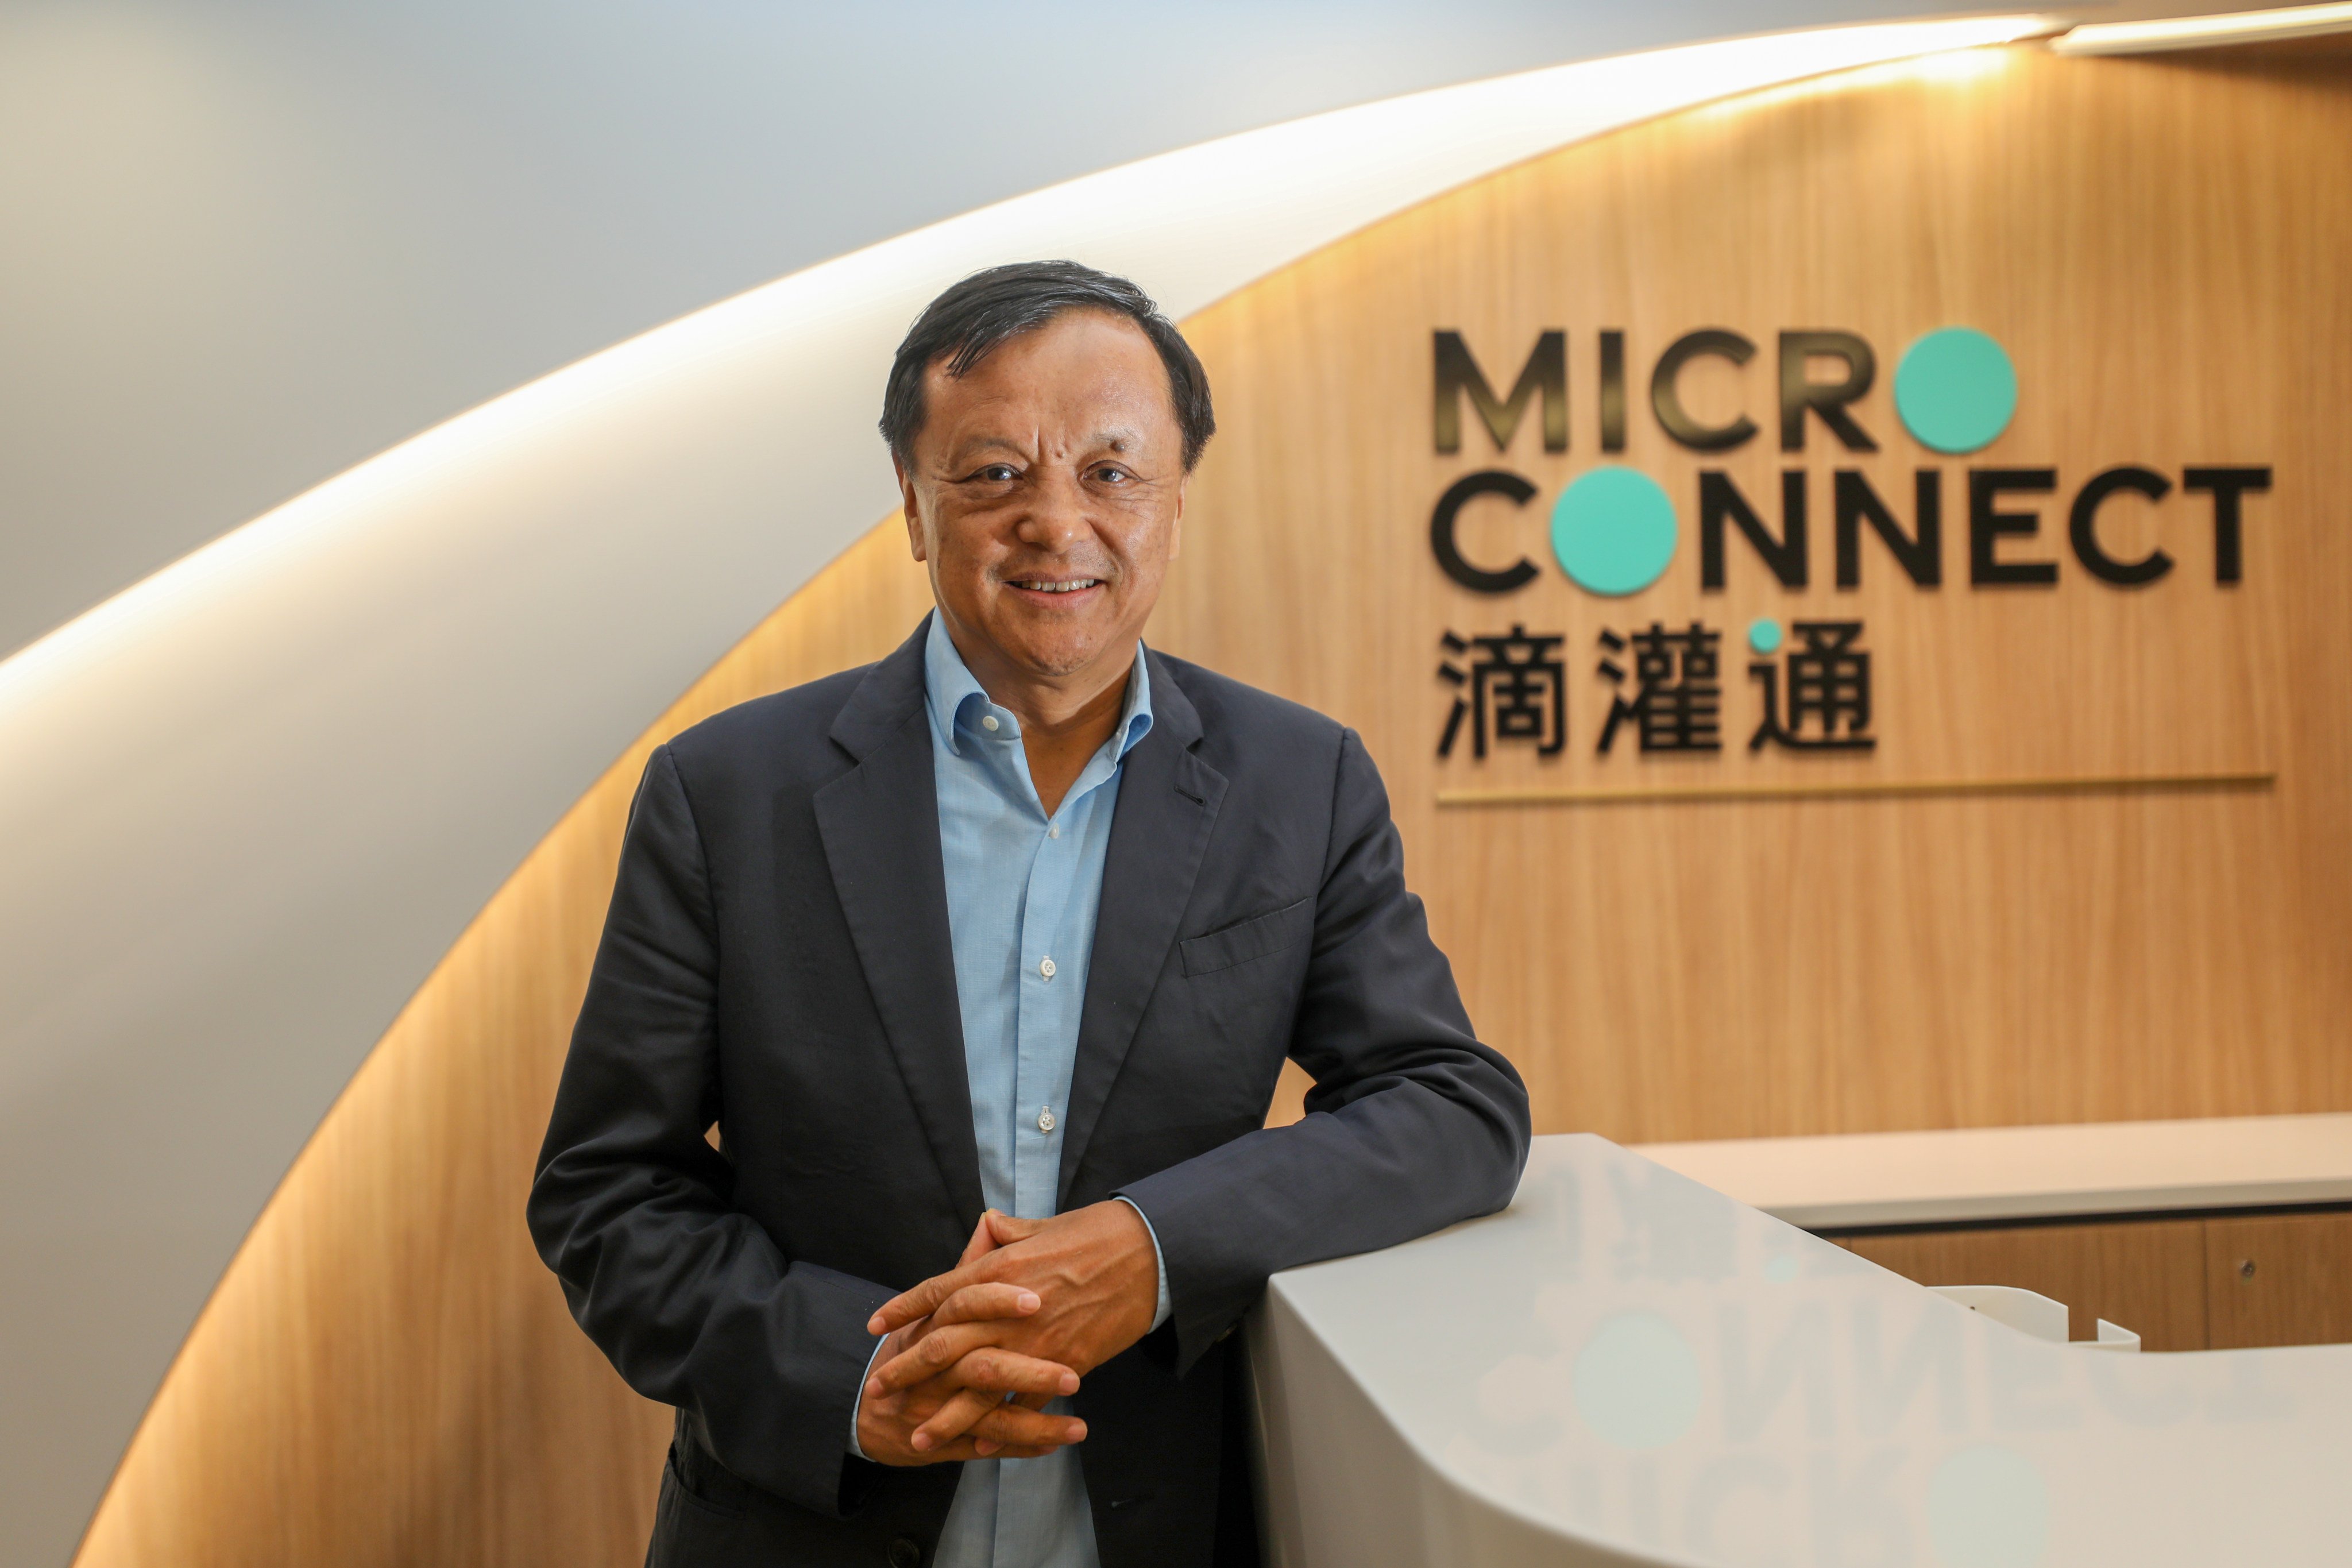 Former Hong Kong Exchanges and Clearing (HKEX) boss Charles Li Xiaojia launched the fintech platform Micro Connect in August 2021. Photo: Xiaomei Chen